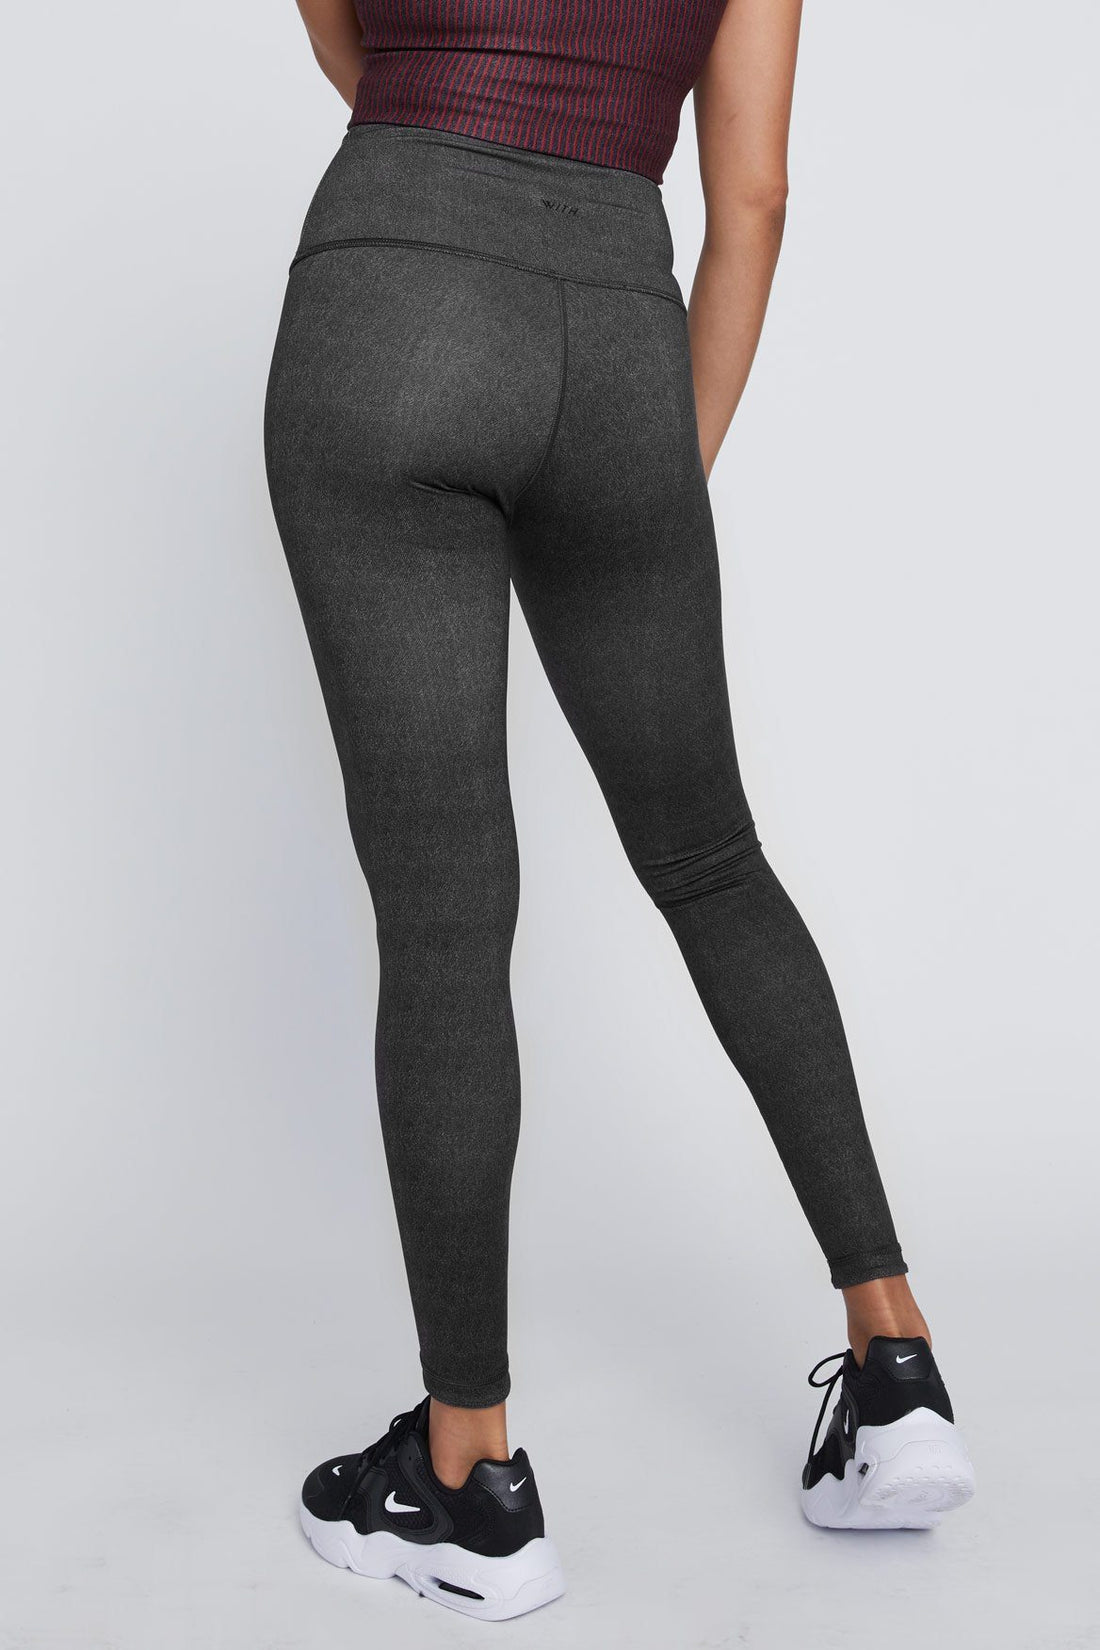 Photos of the align track stripe joggers in graphite grey/diamond dye in  size 10! I am usually a TTS 8 in leggings but sized up because the 8 was  too tight on